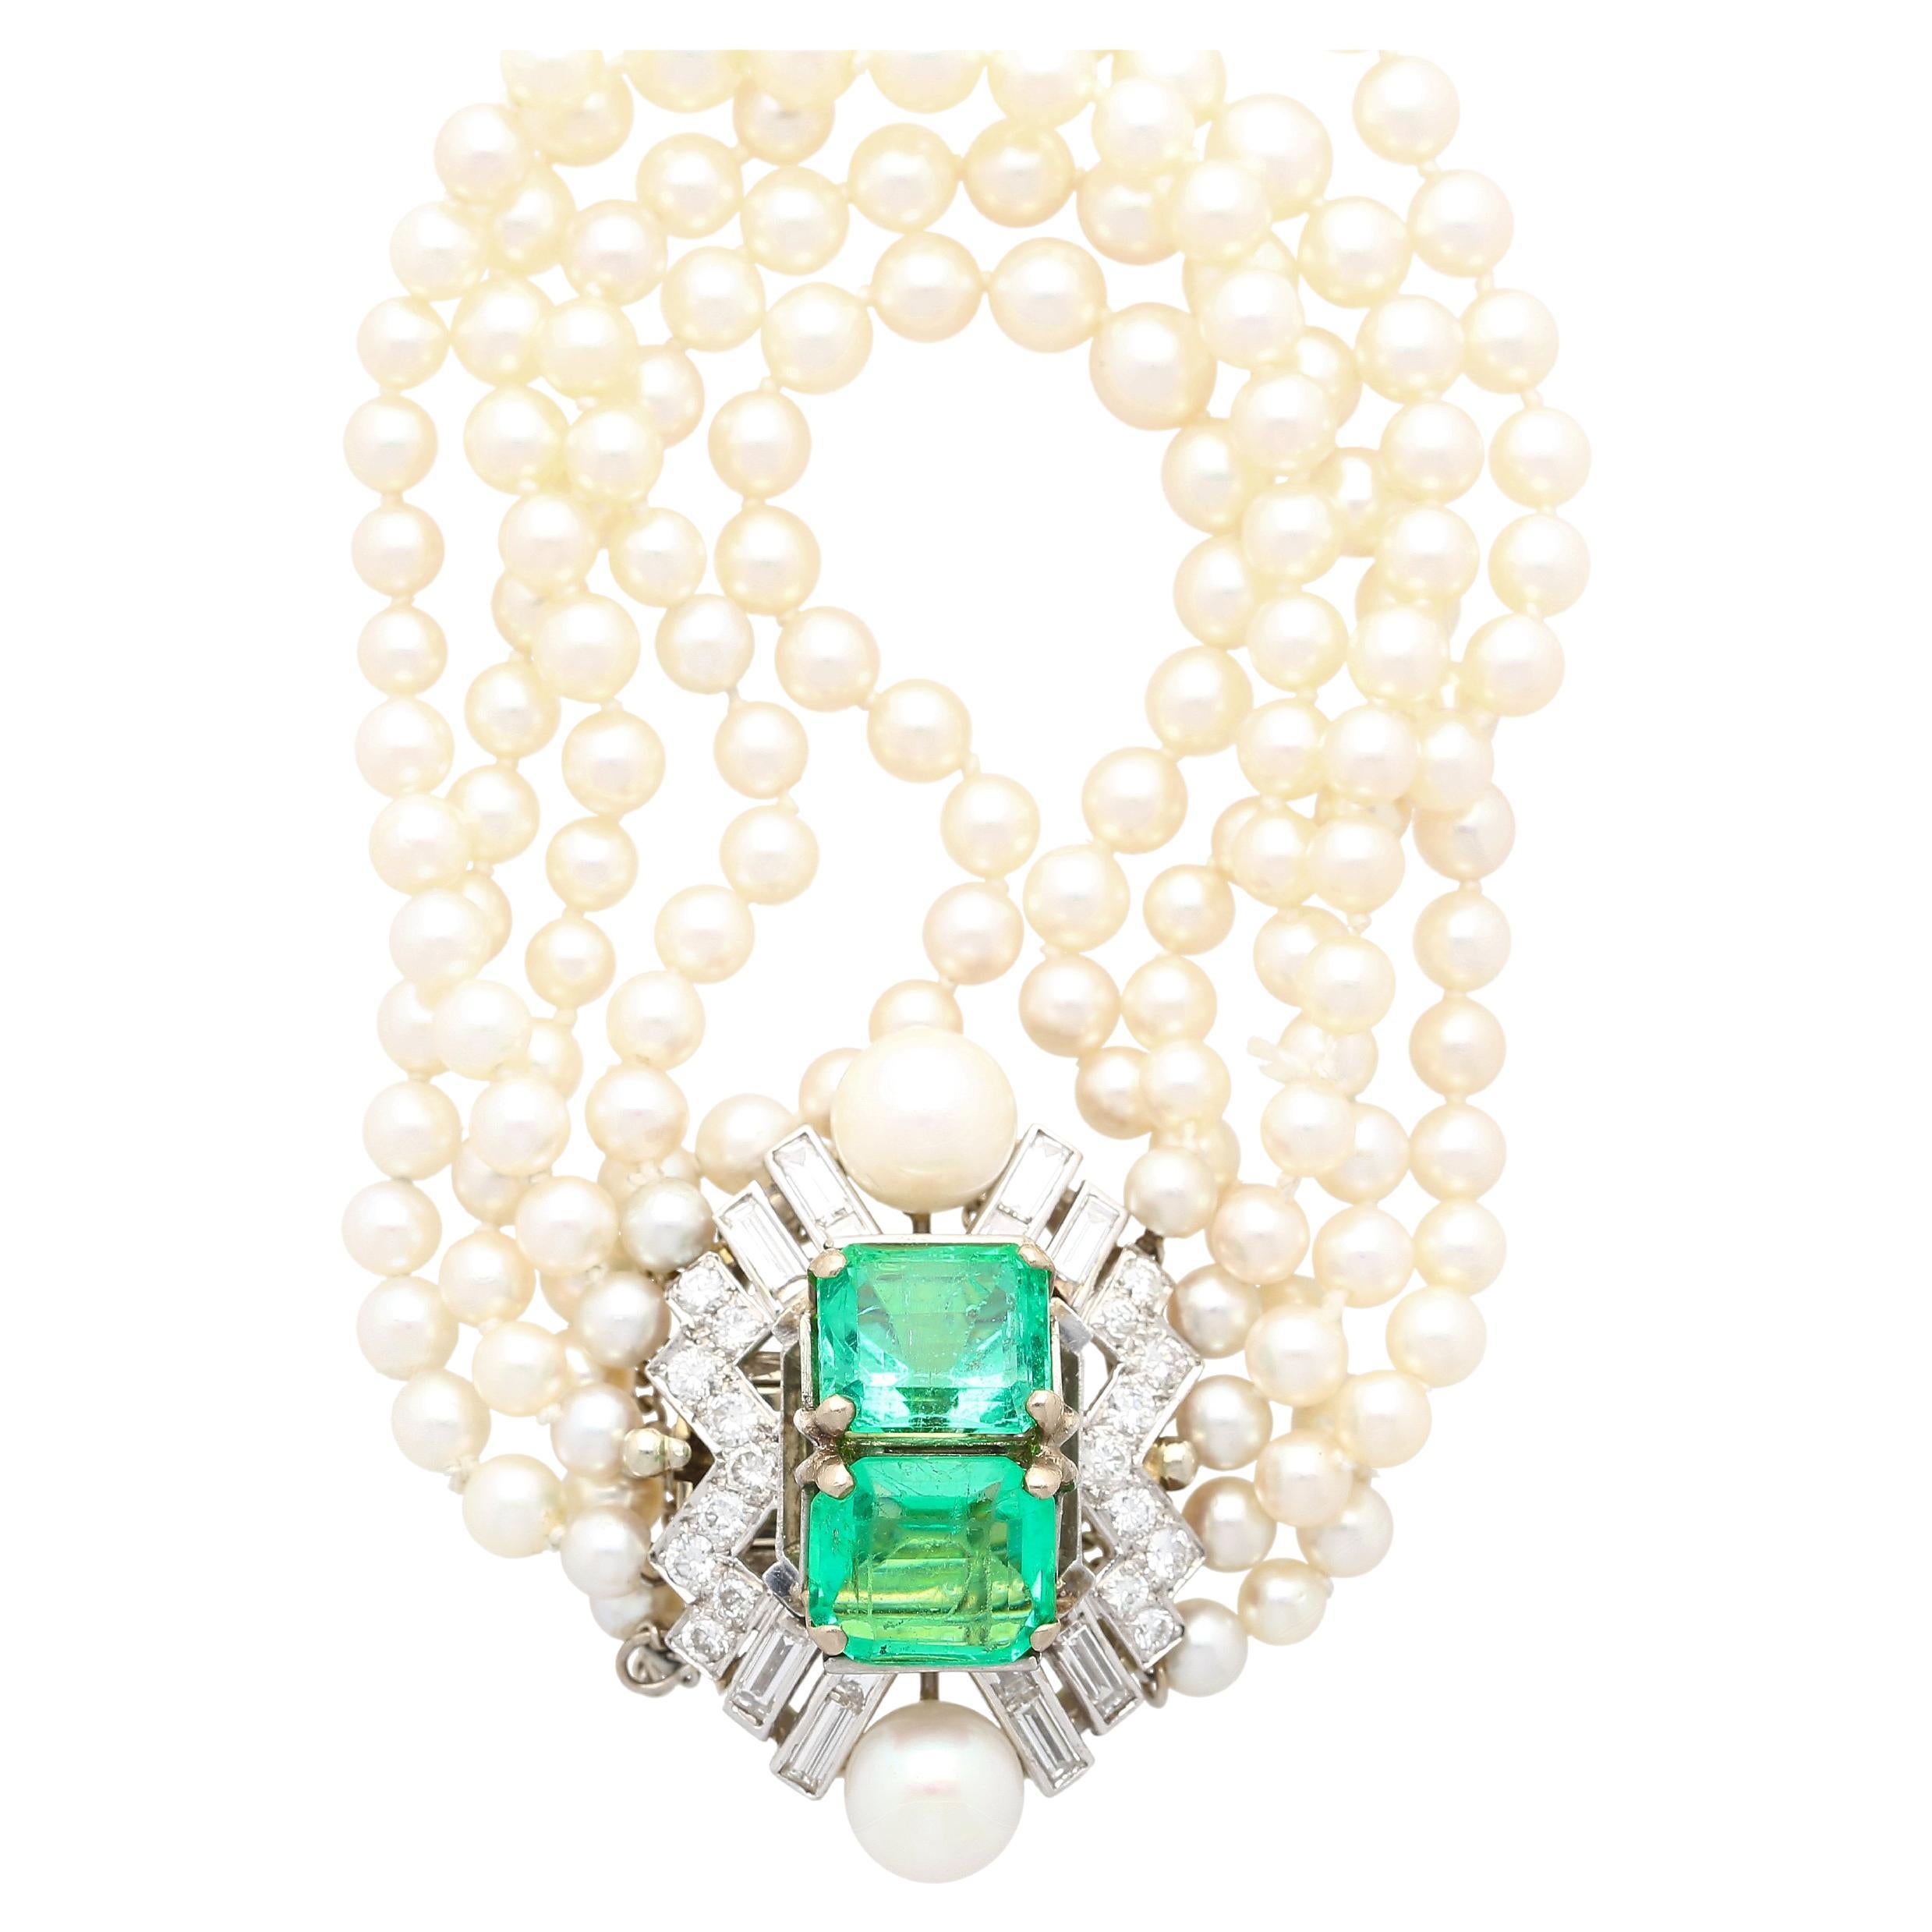 Indulge in the allure of our captivating Art Deco bracelet, featuring a fusion of elegance and vintage charm. Adorned with five rows of 8.25 and 4.6 MM of natural pearls. Enhancing its allure is 8 carats of vibrant light green emeralds taking center